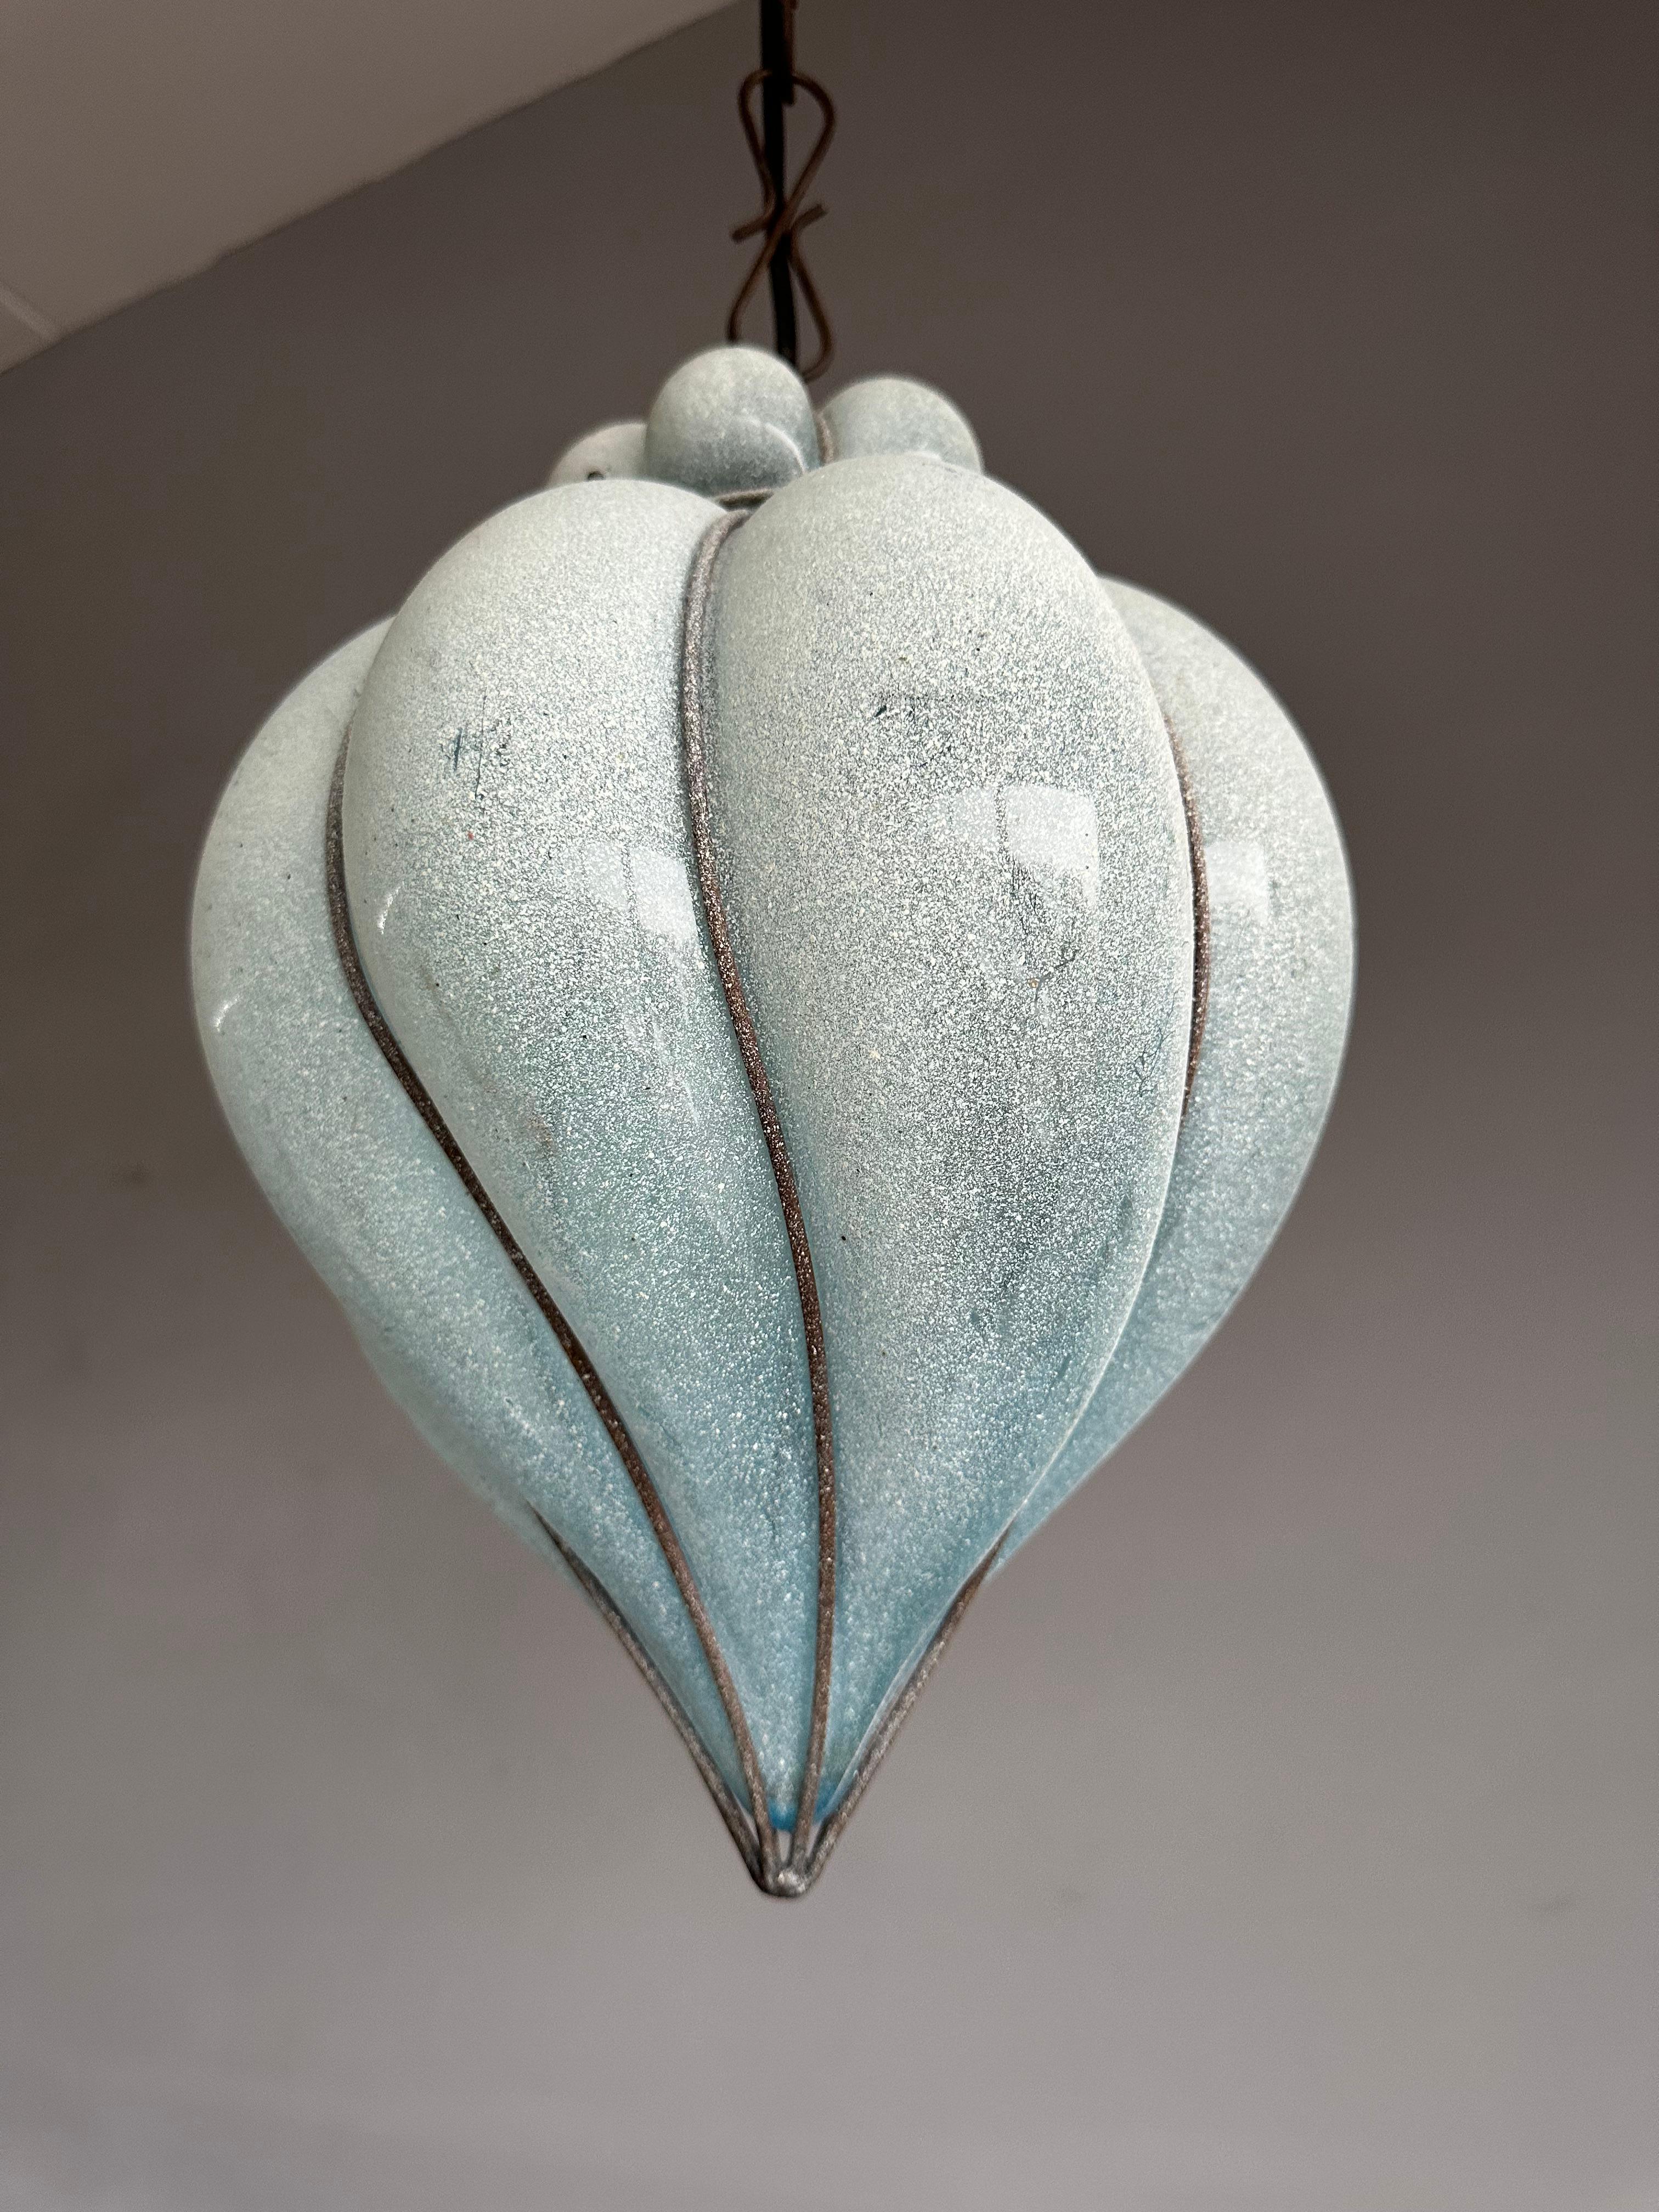 Rare twirled design and highly decorative color Venetian light fixture.

This work of art glass pendant is another one of our recent great finds. Handcrafted and mouthblown in one of the Venetian glass art studios in the 1970s, 1980s this rare blue